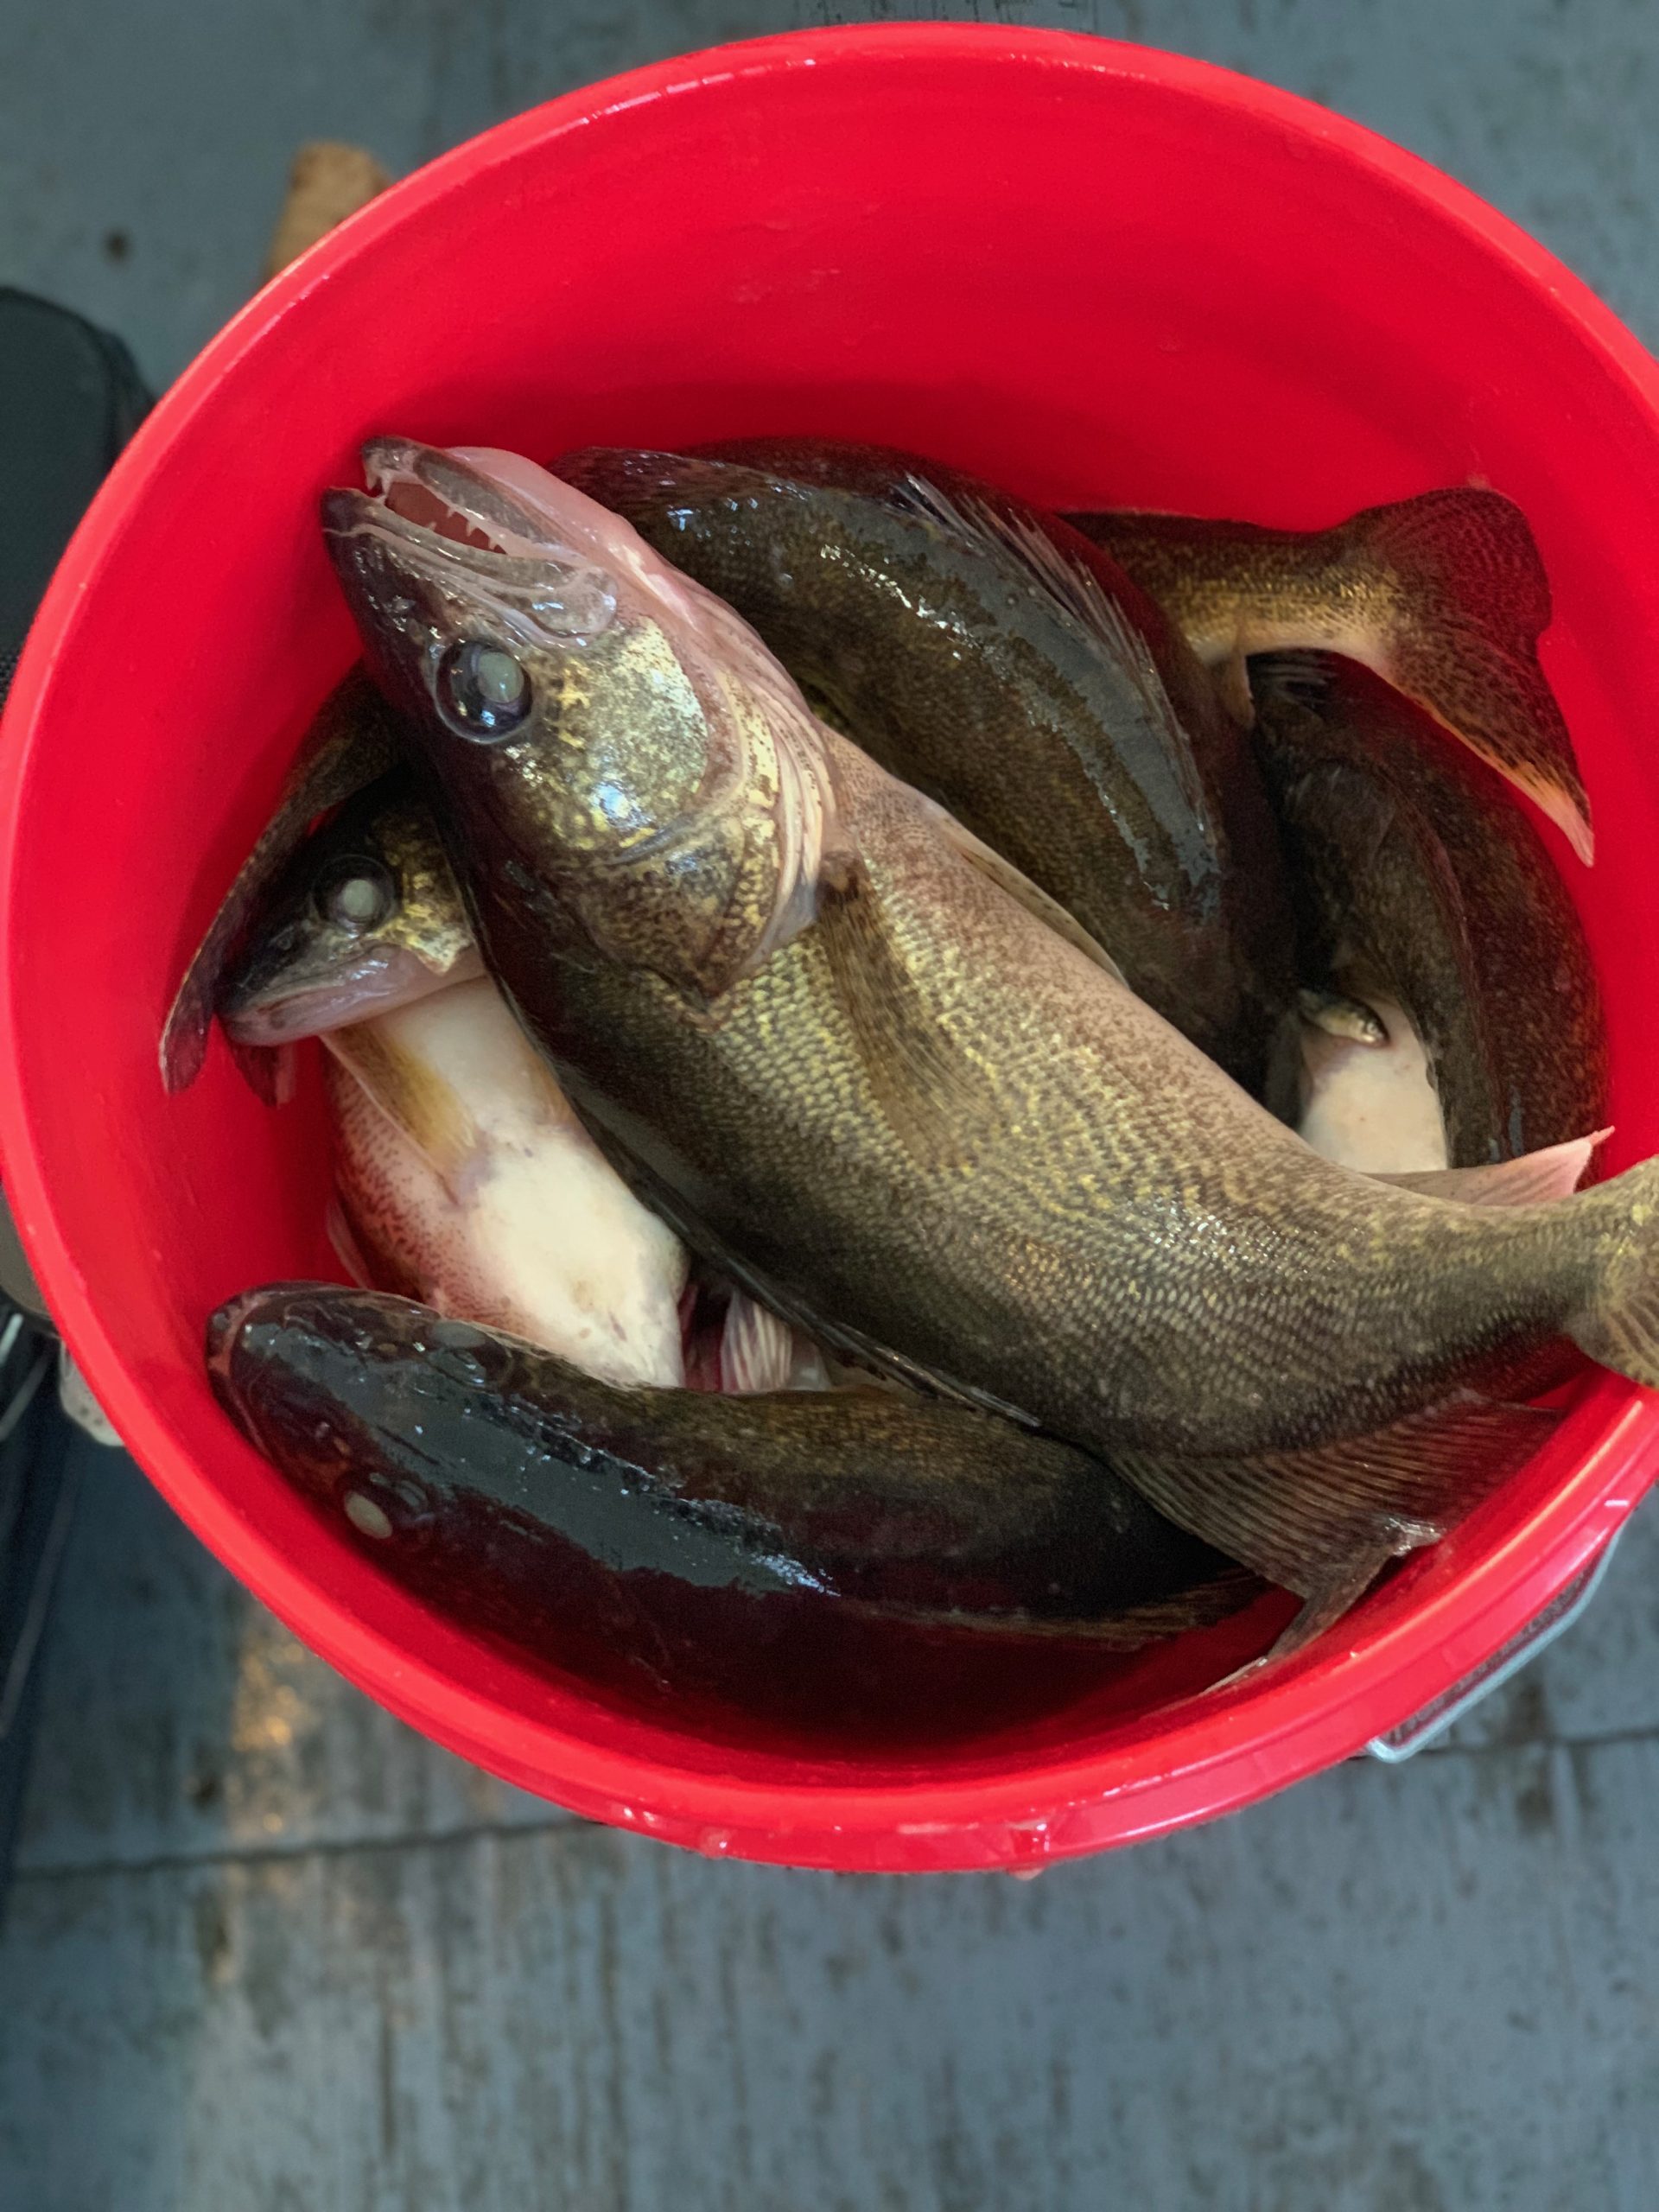 Lake of the Woods Tourism wins Walleye Wars reaches big numbers